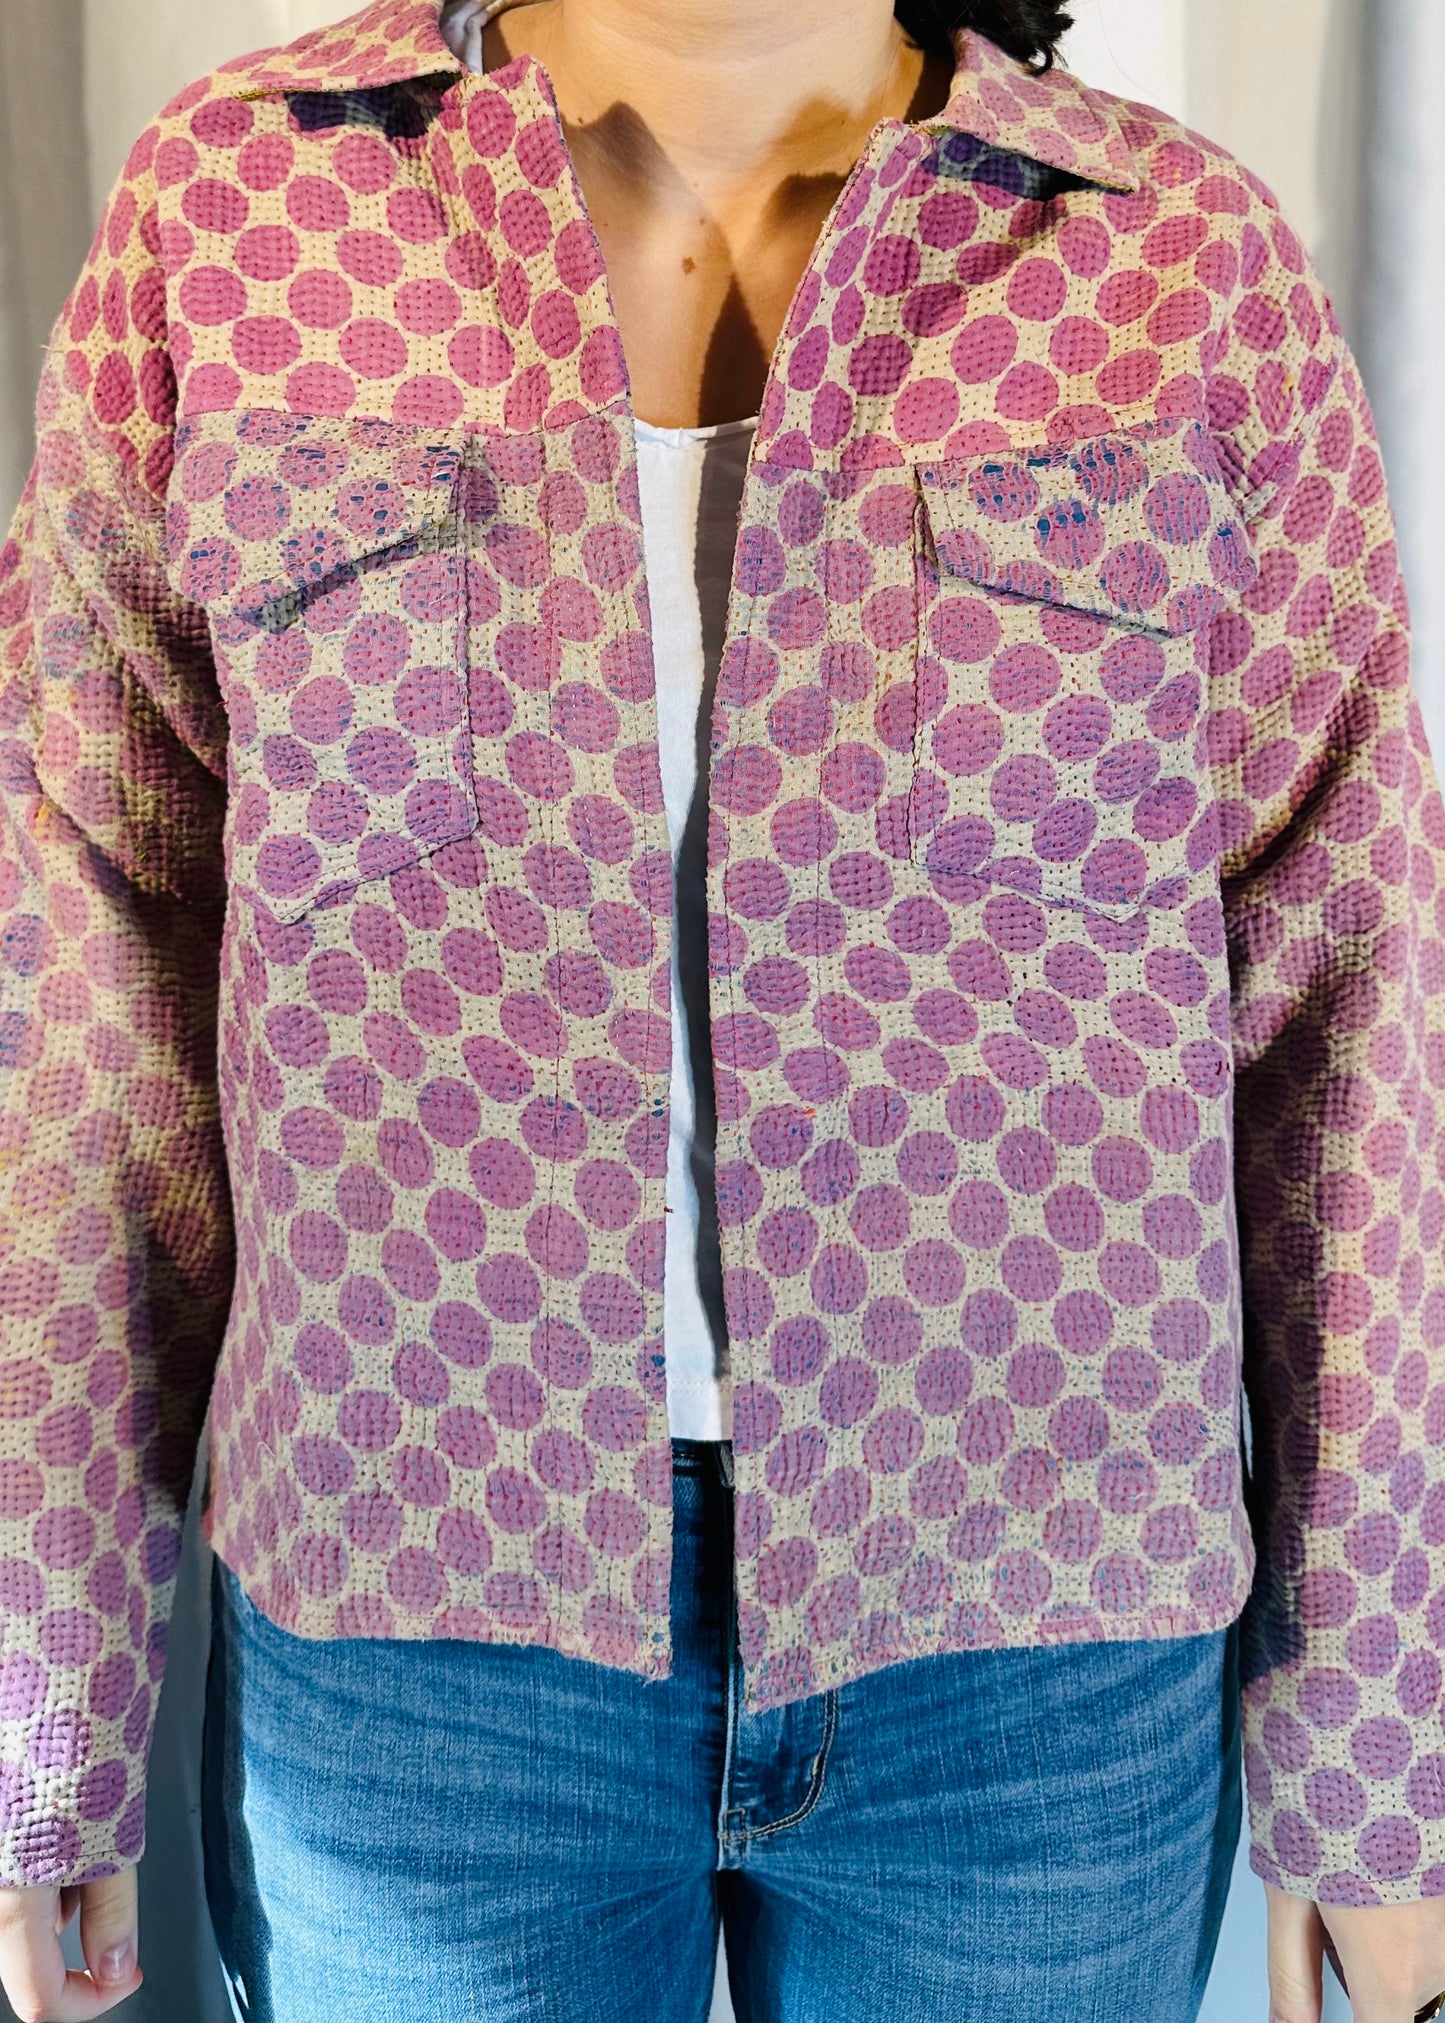 Sustainably Crafted Unique Quilted Trucker Jacket with Purple Polka Dots on Cream from Recycled Saris - DharBazaar